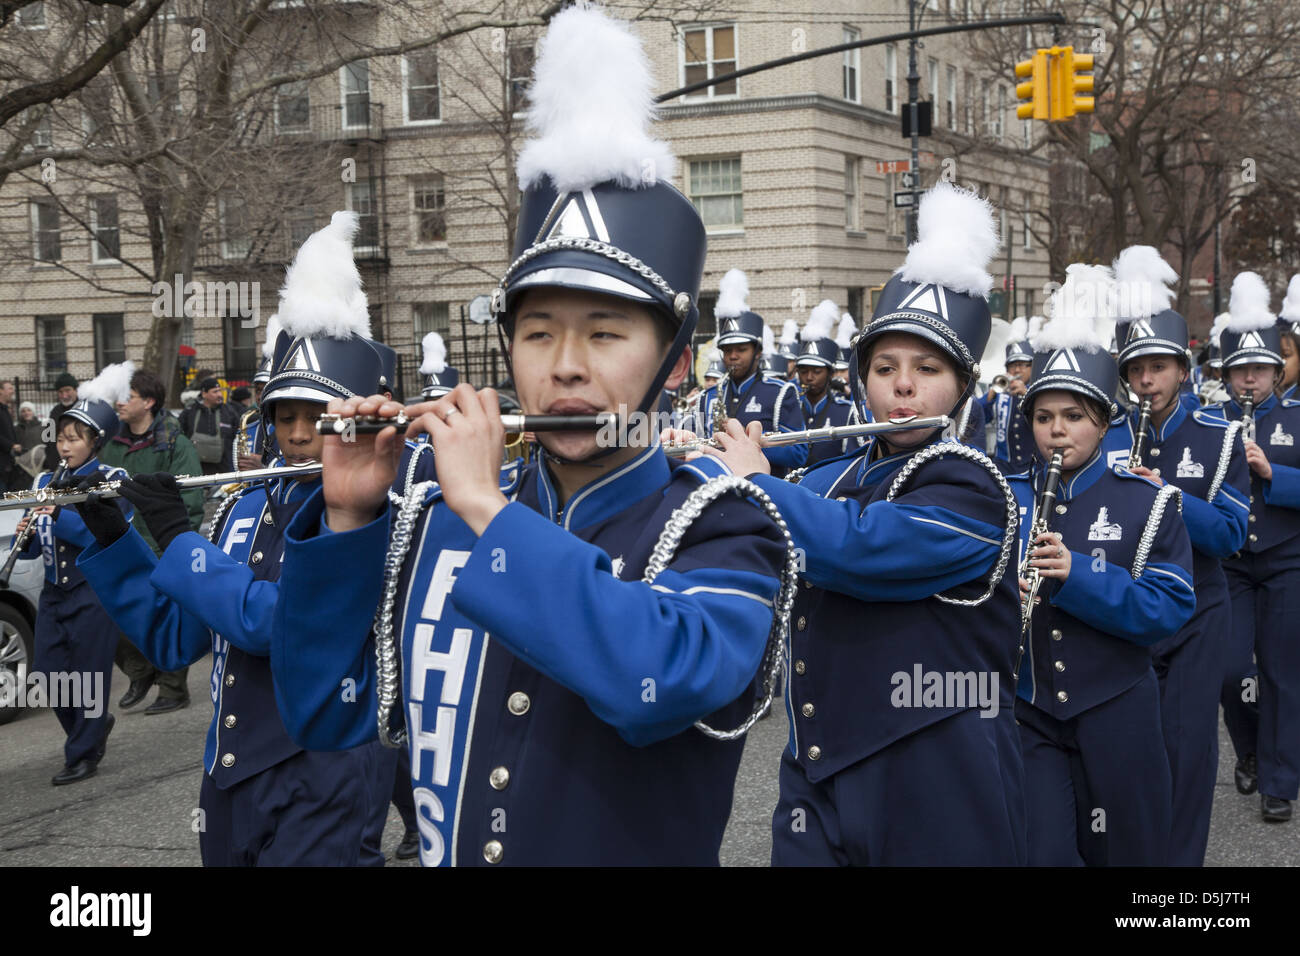 The annual Irish Parade in Park Slope, Brooklyn, NY this year was celebrated on Saint Patrick's Day, March 17th. Stock Photo